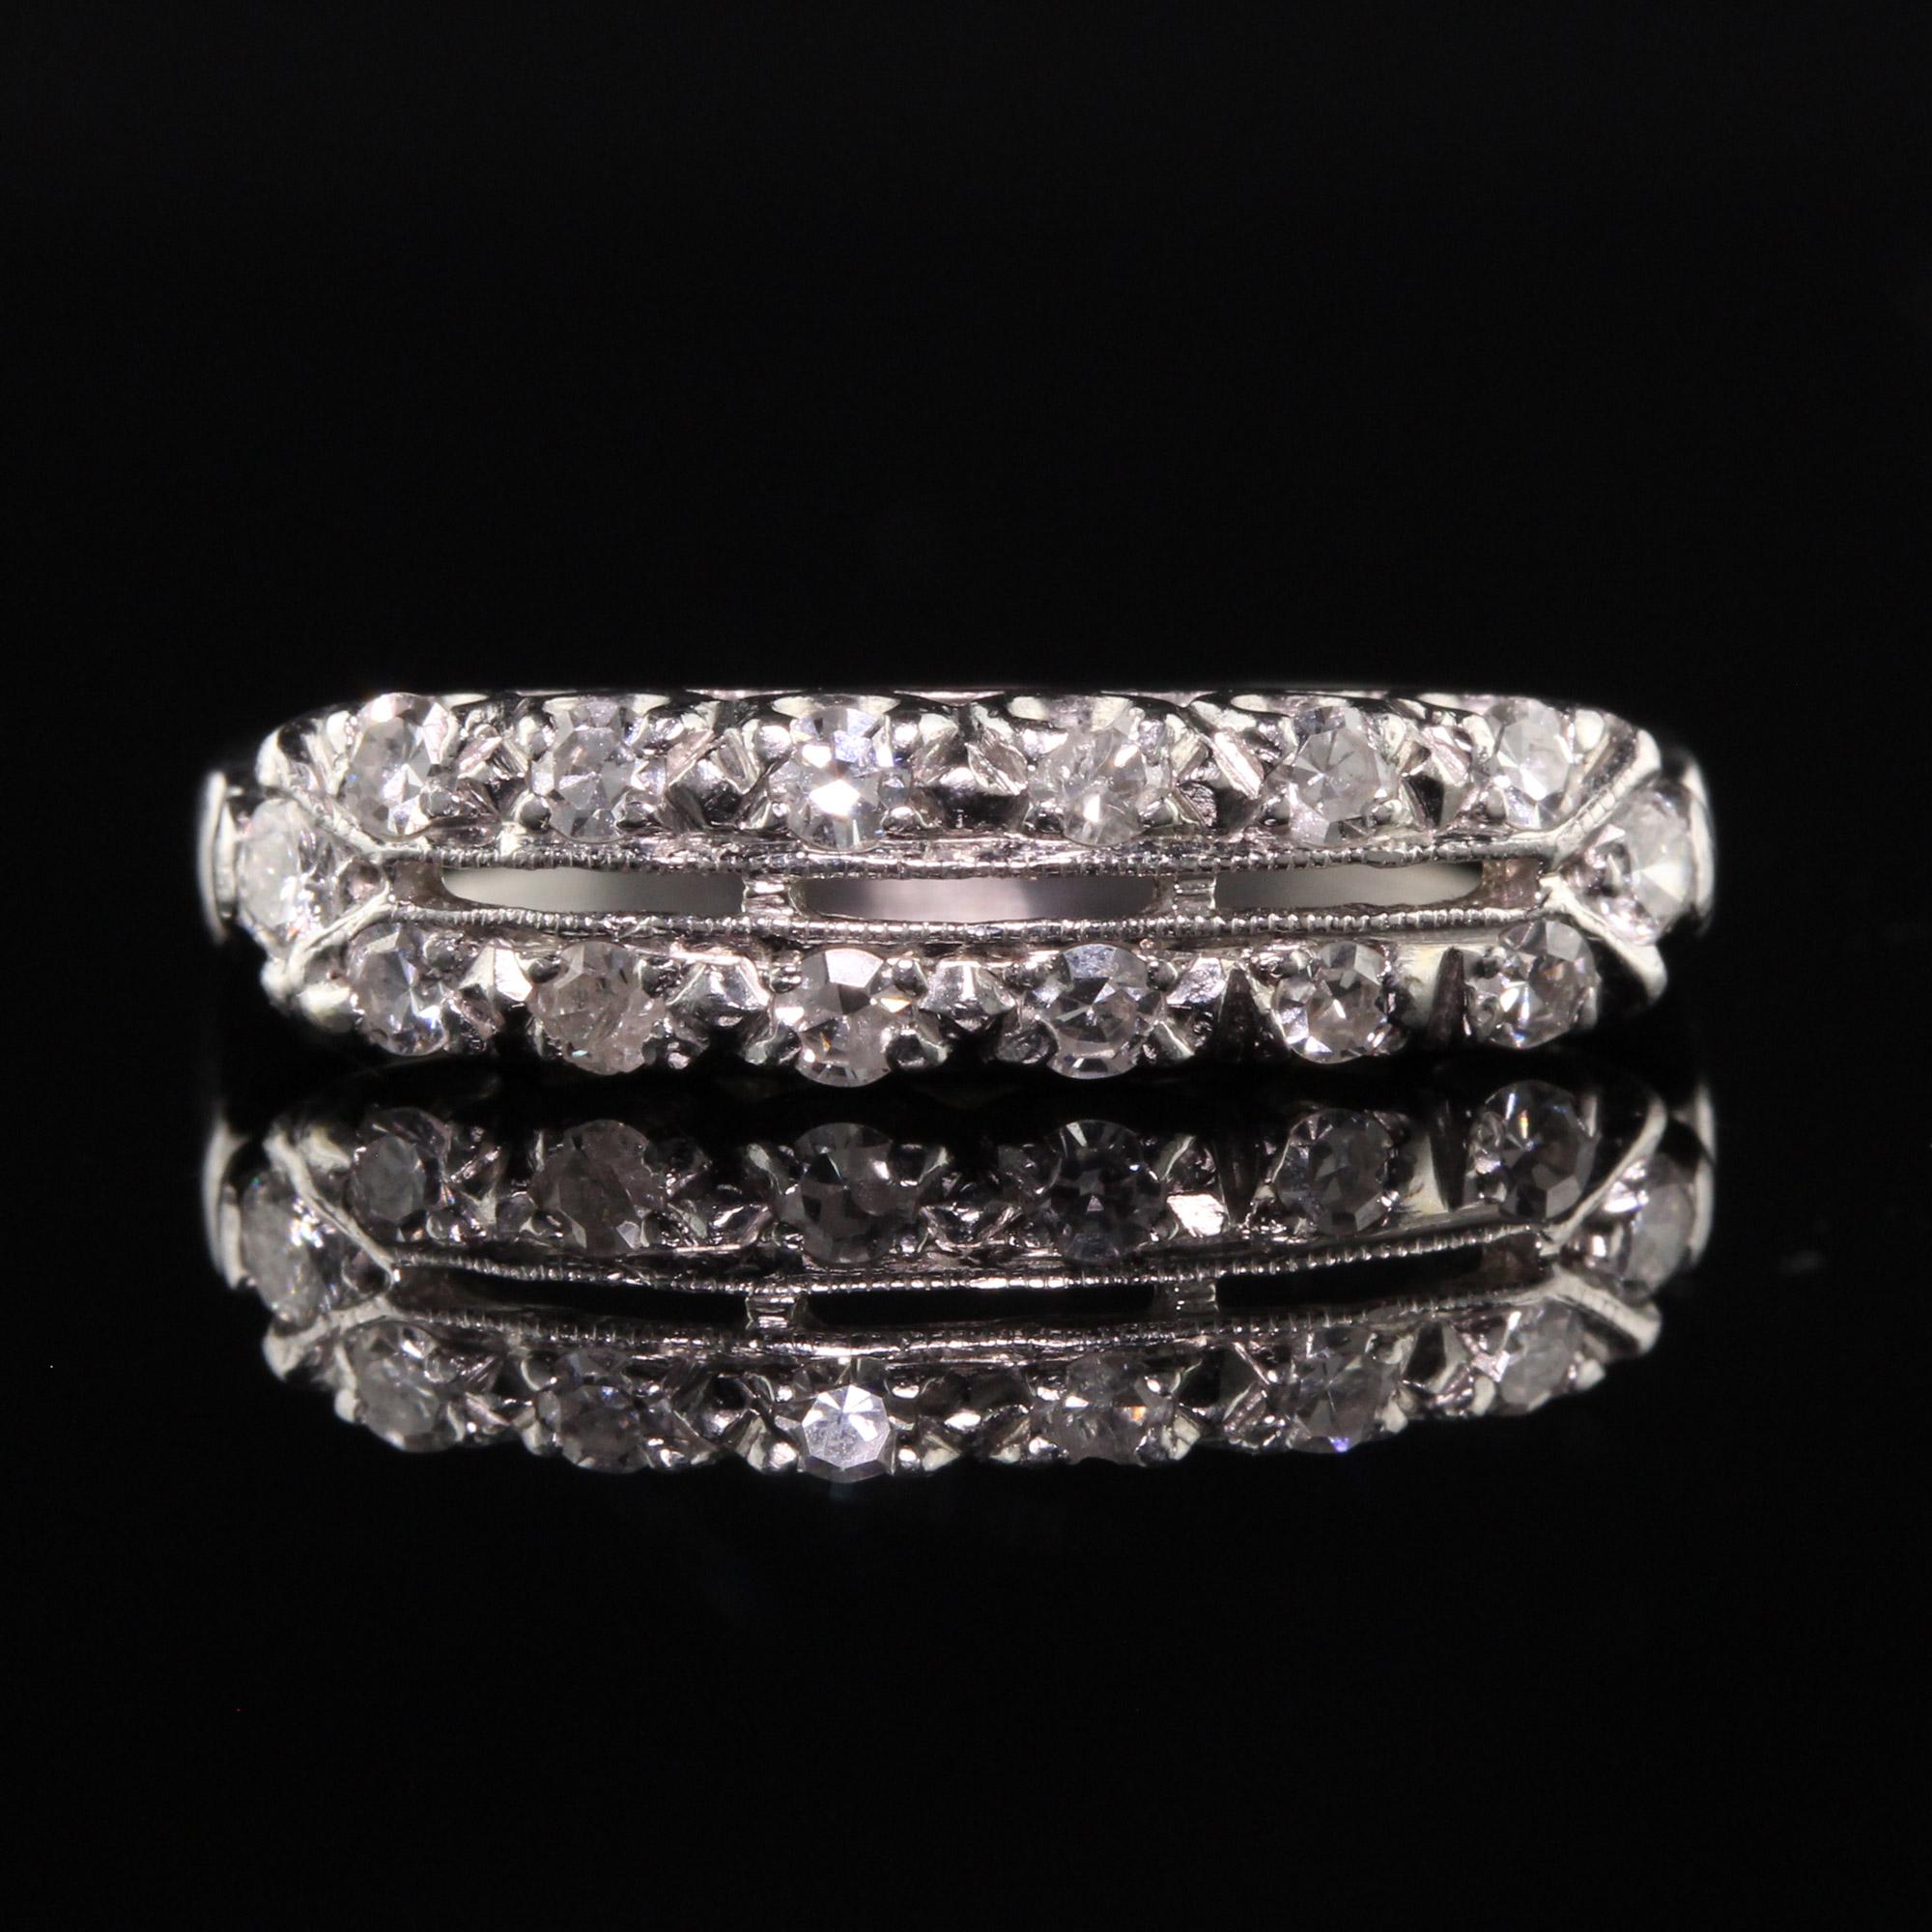 Antique Art Deco Platinum Single Cut Diamond Filigree Wedding Band In Good Condition For Sale In Great Neck, NY